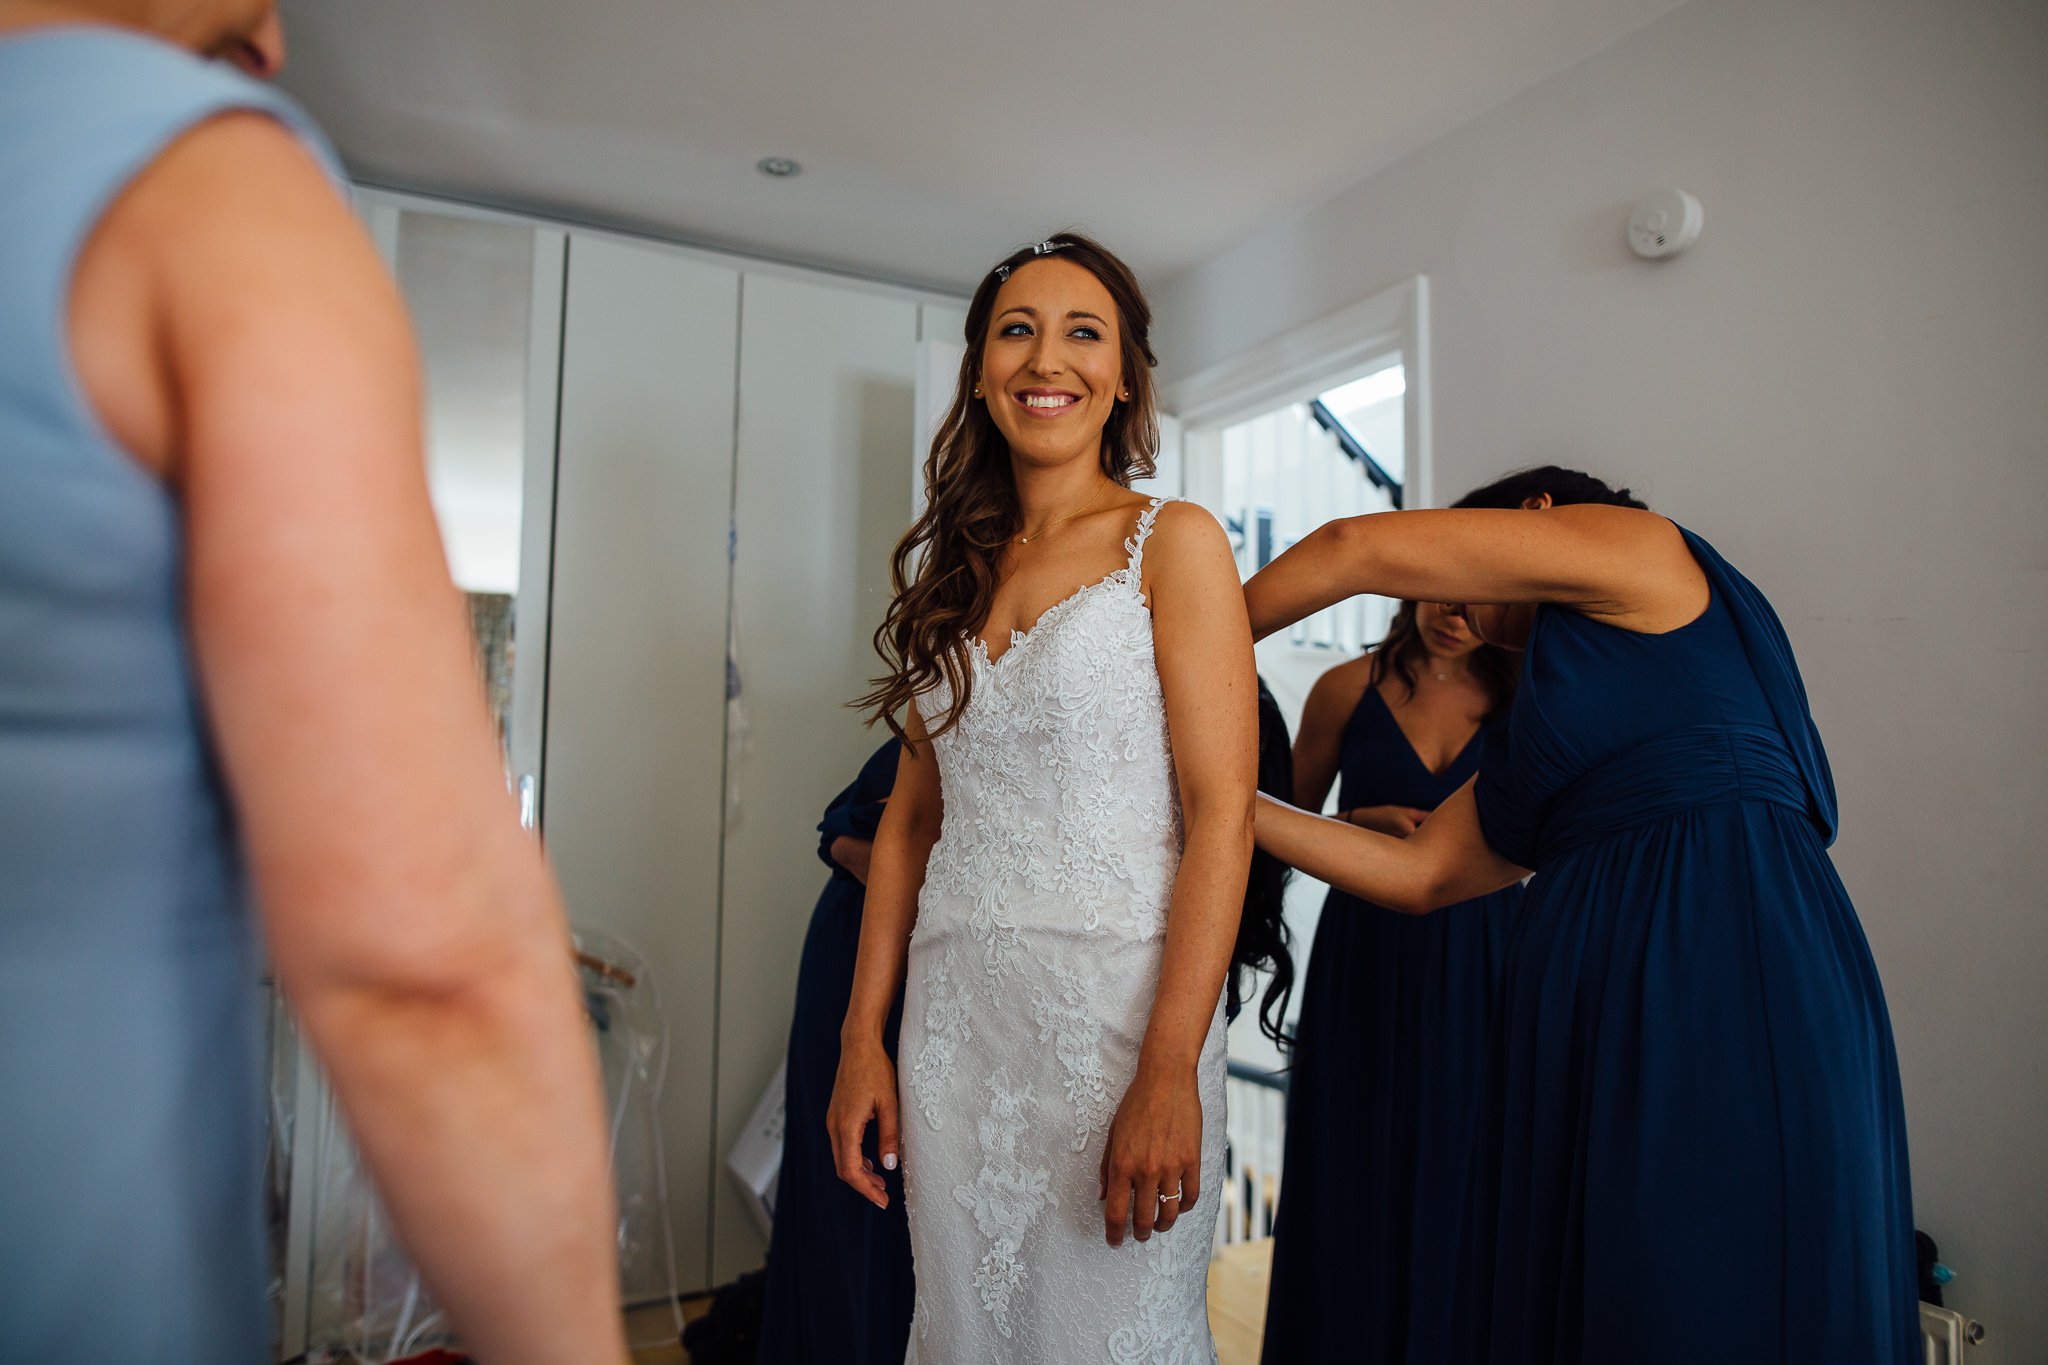  Bride smiling with her dress on 